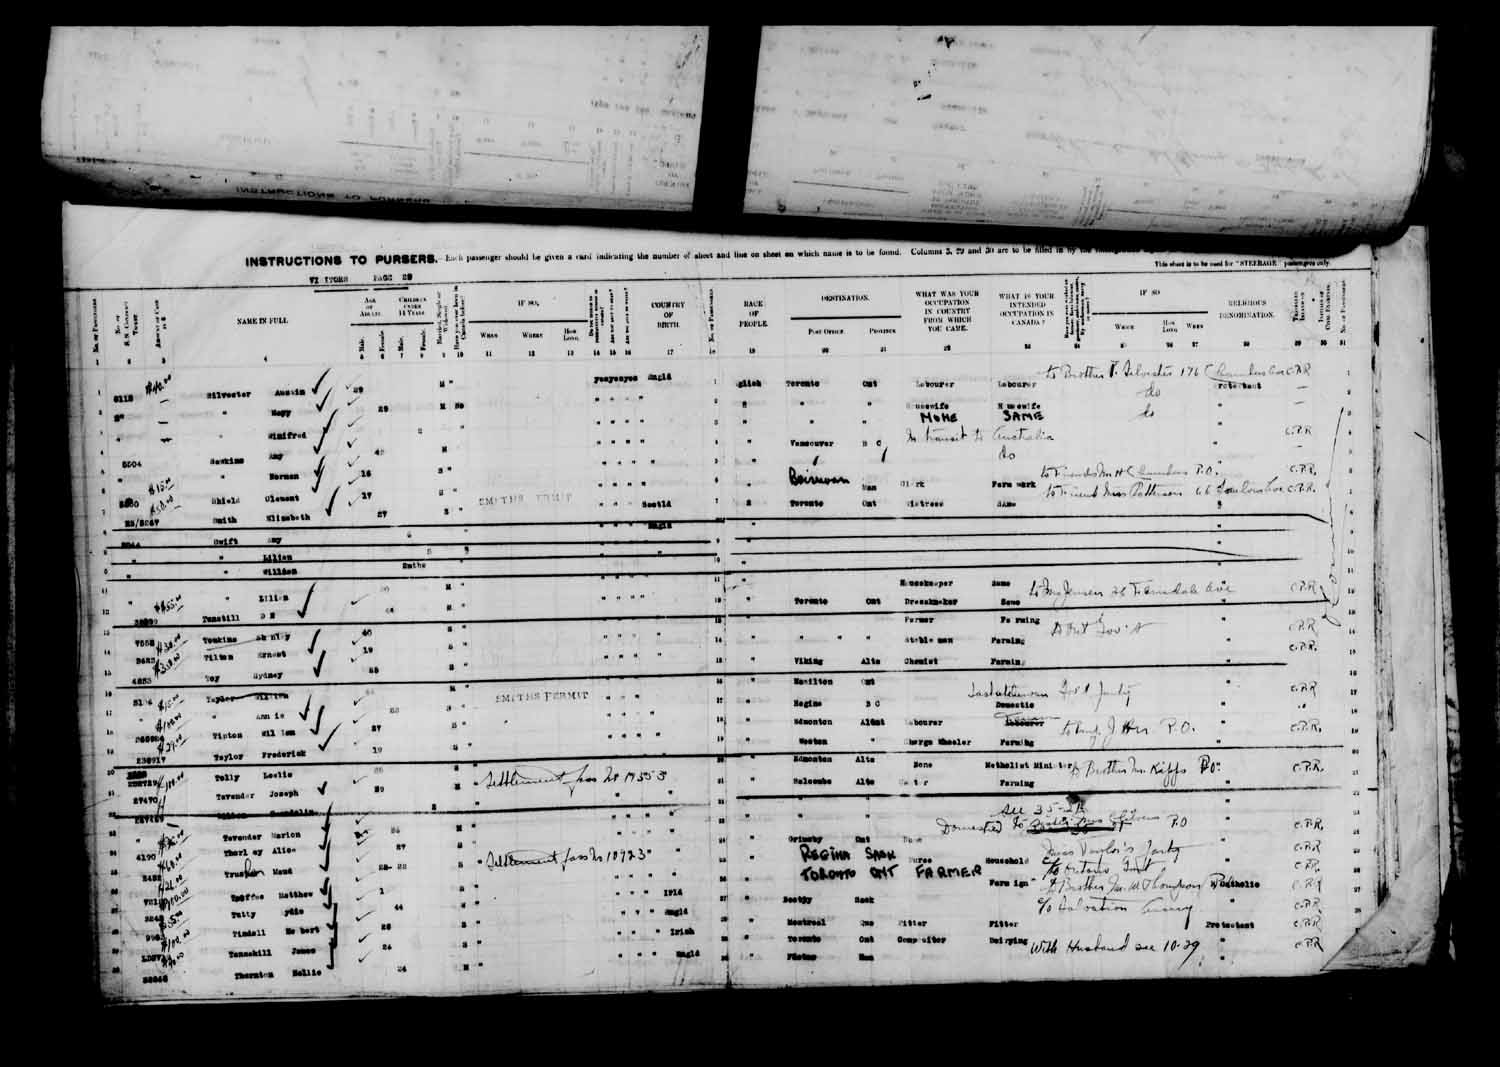 Digitized page of Passenger Lists for Image No.: e003610662